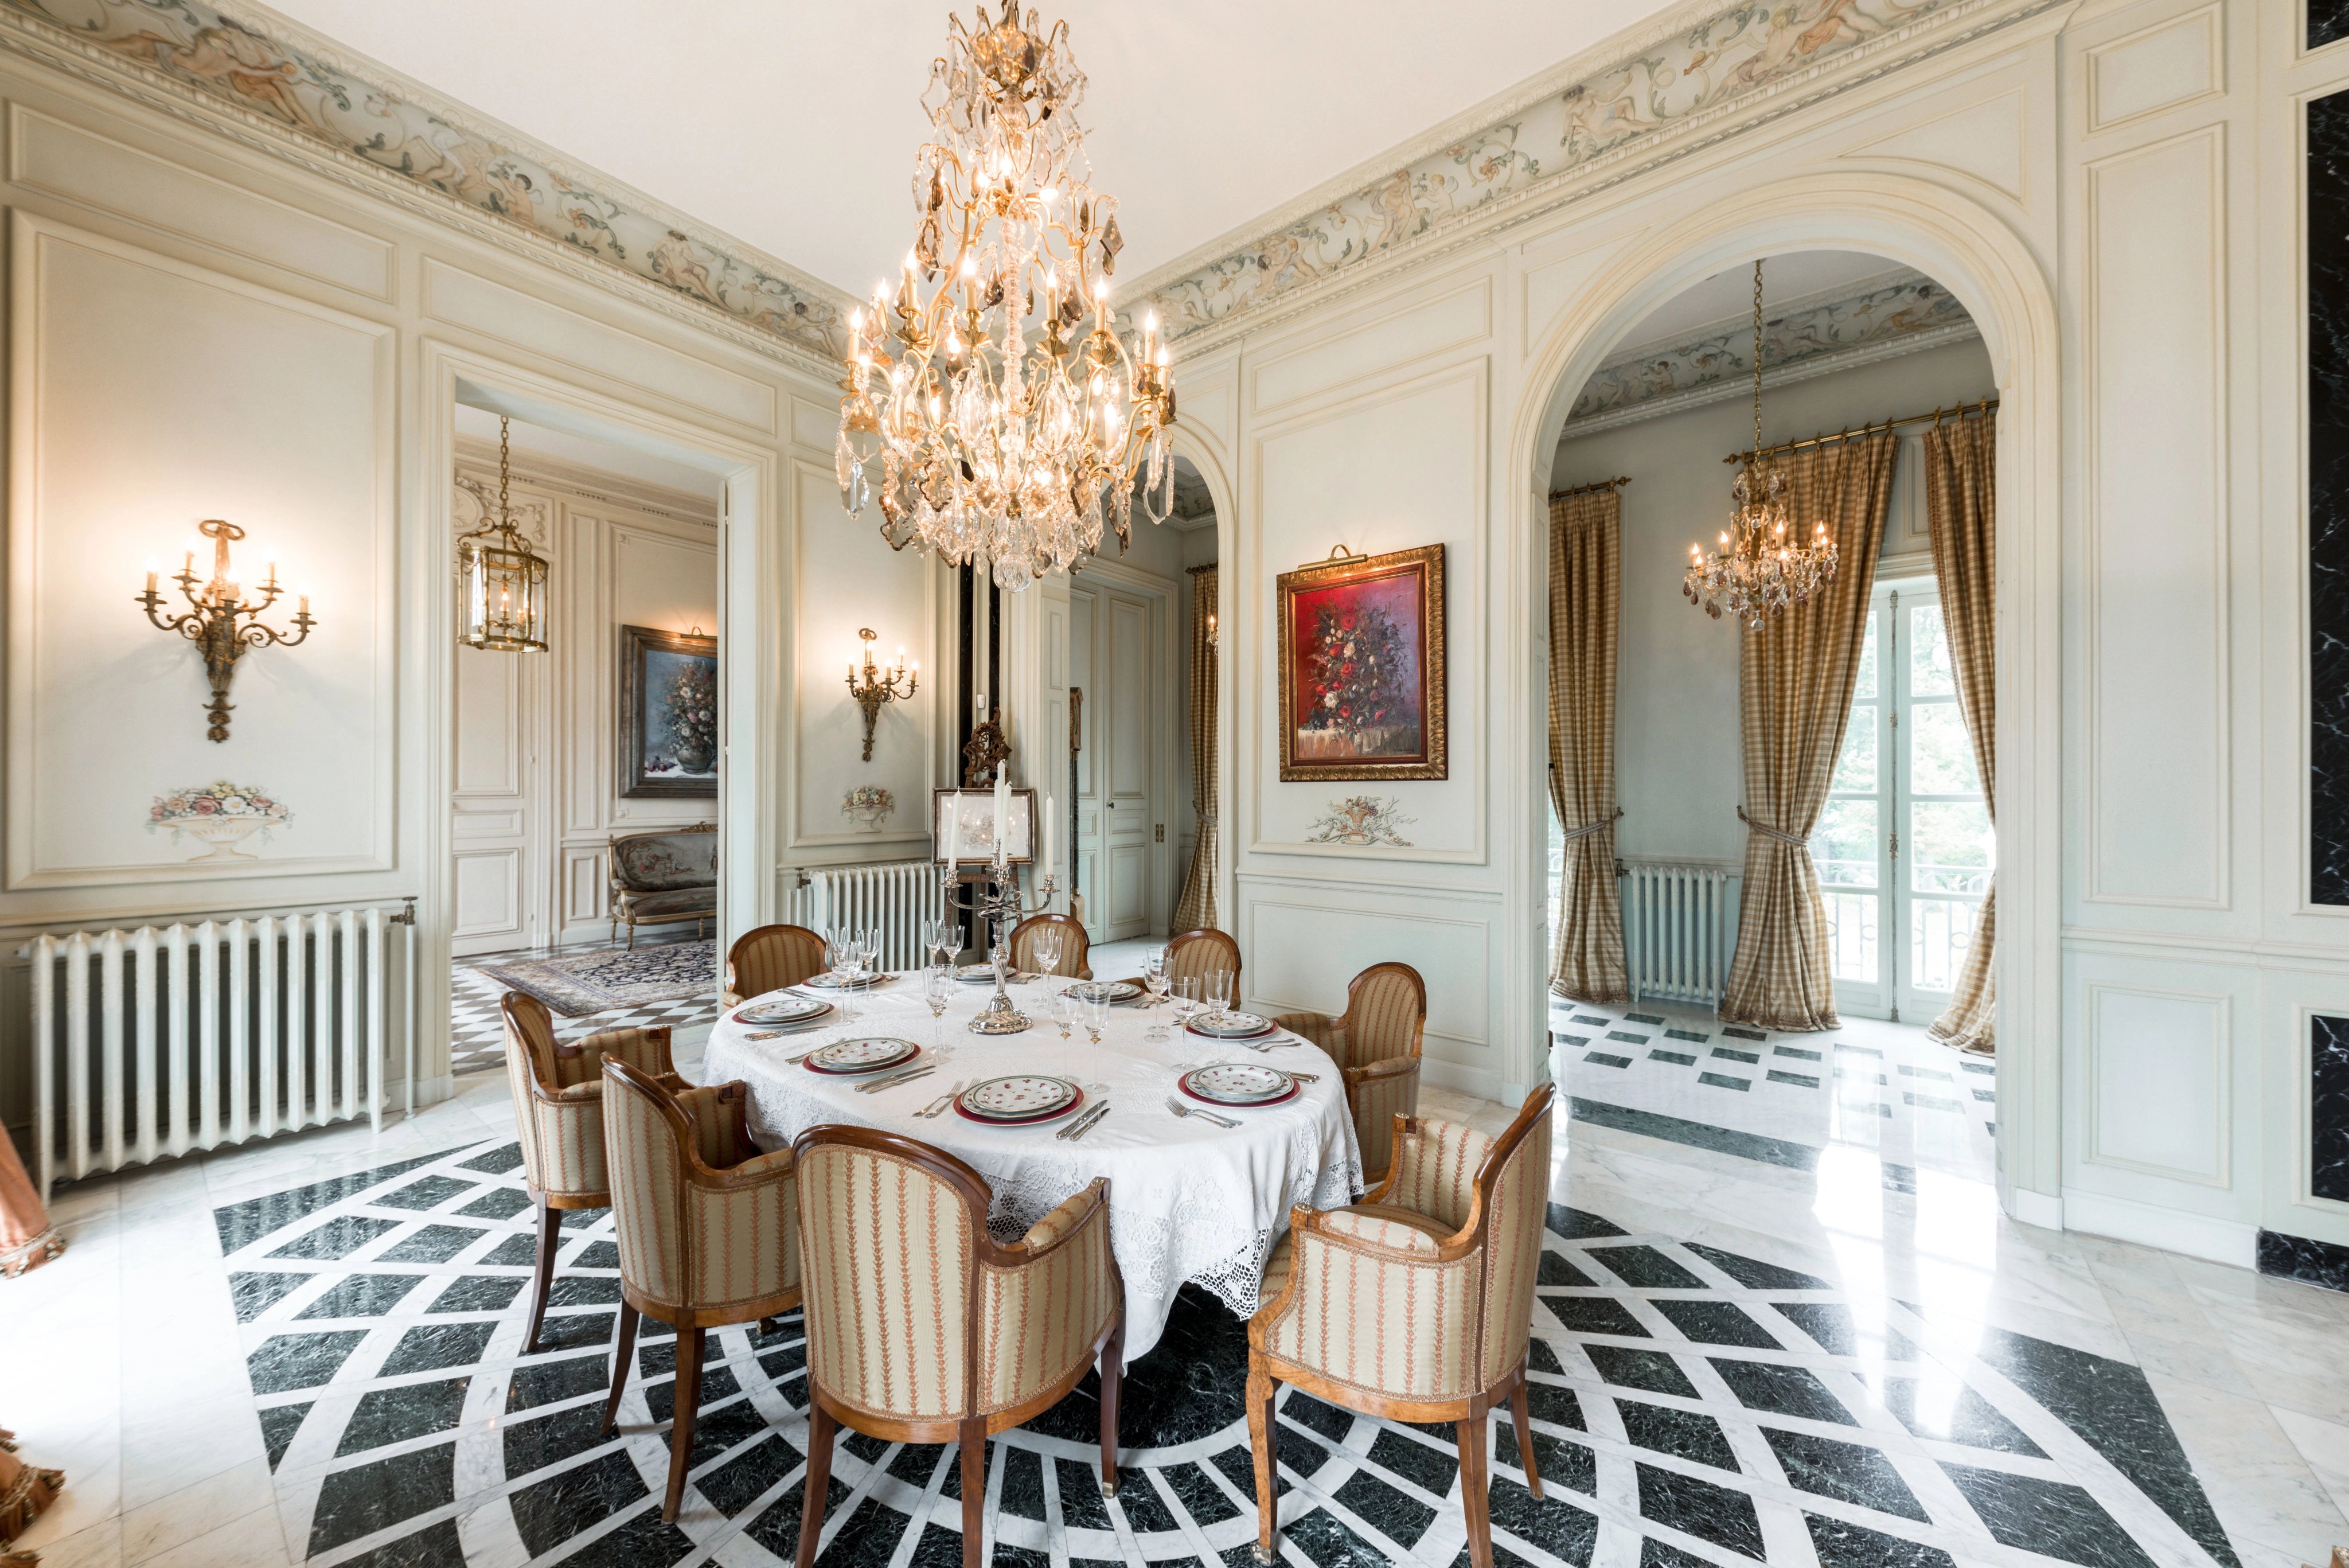 A sublime Palais inspired by Grand Trianon Palace, 20 min from Paris_1597